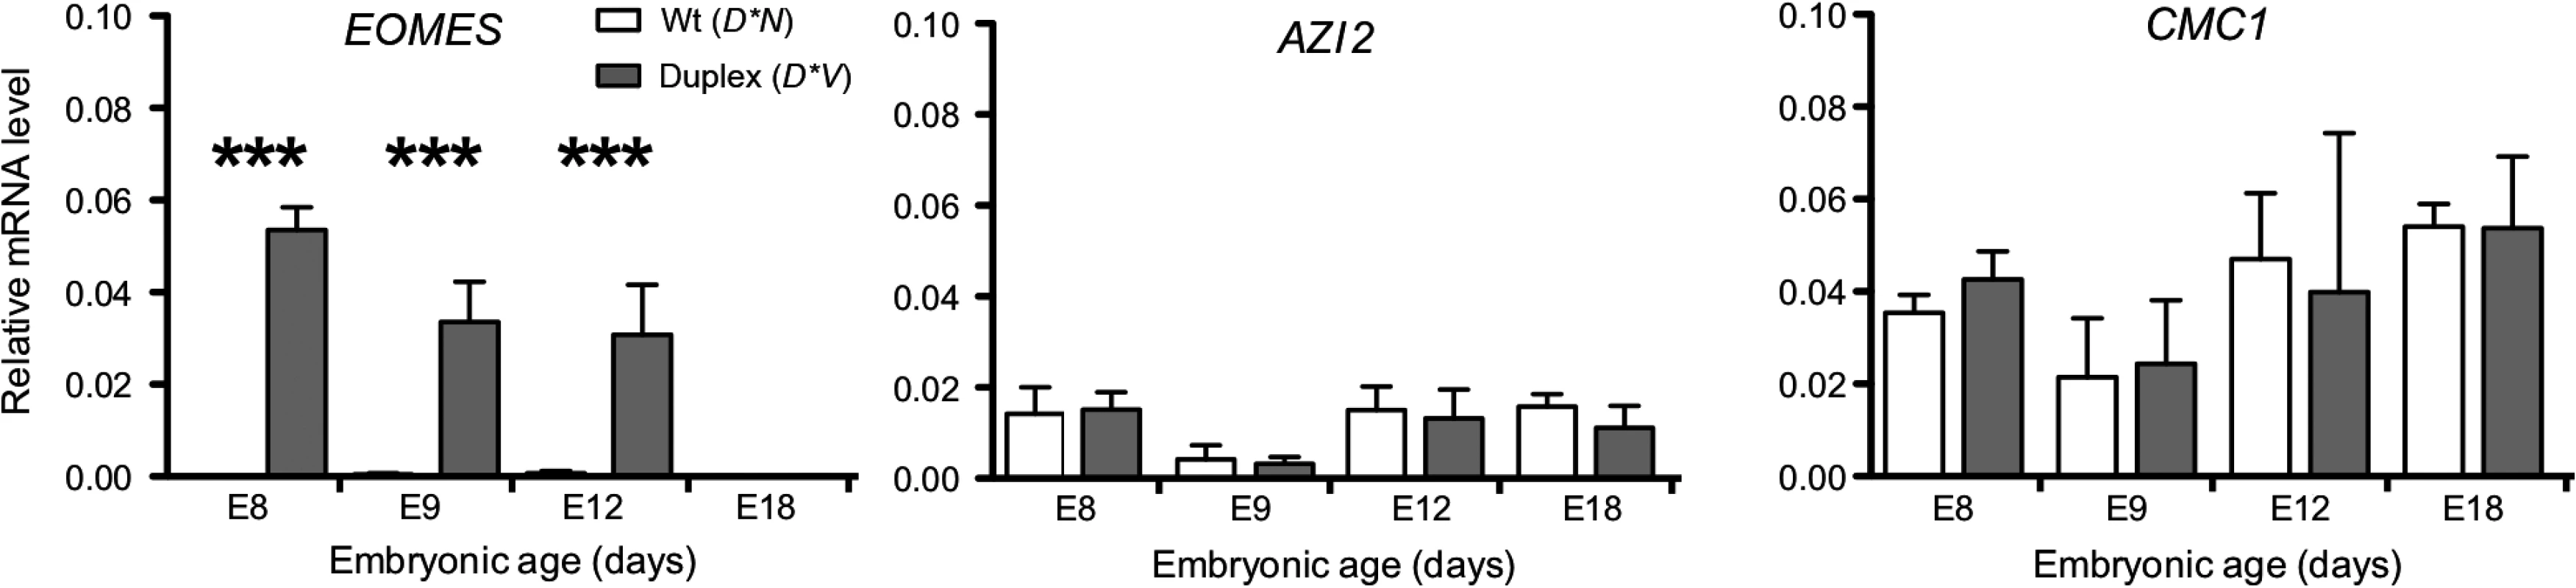 <i>EOMES</i> expression is increased in D*V embryonic comb tissue.